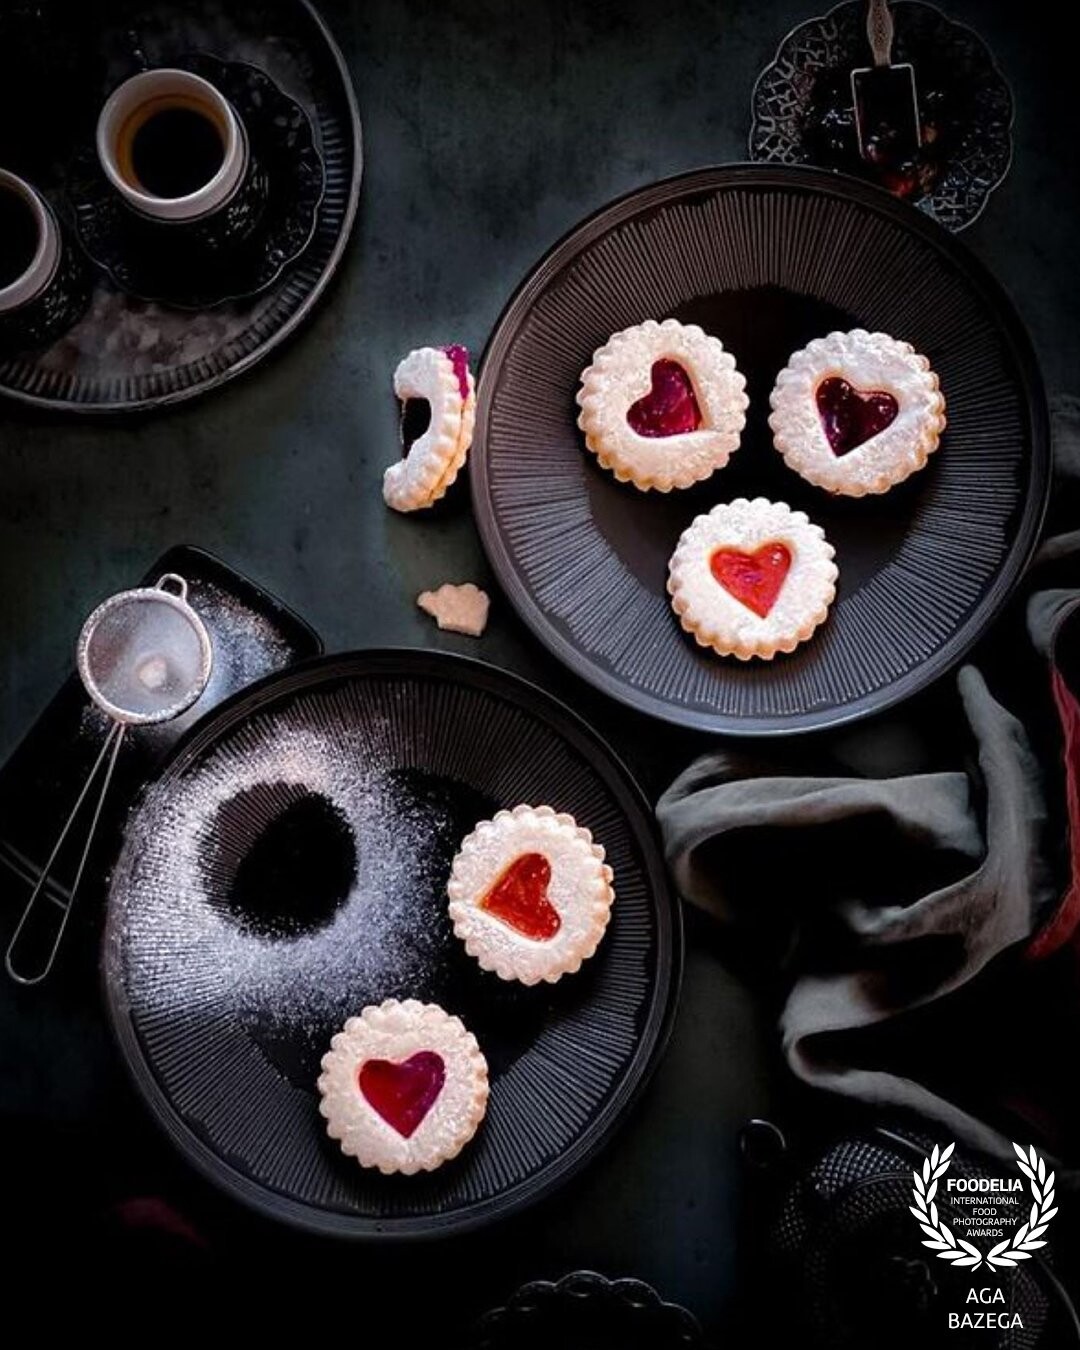 Heart shaped cookies with orange and raspberry filling. The image created in my photography studio for photography contest. Captured with natural light.